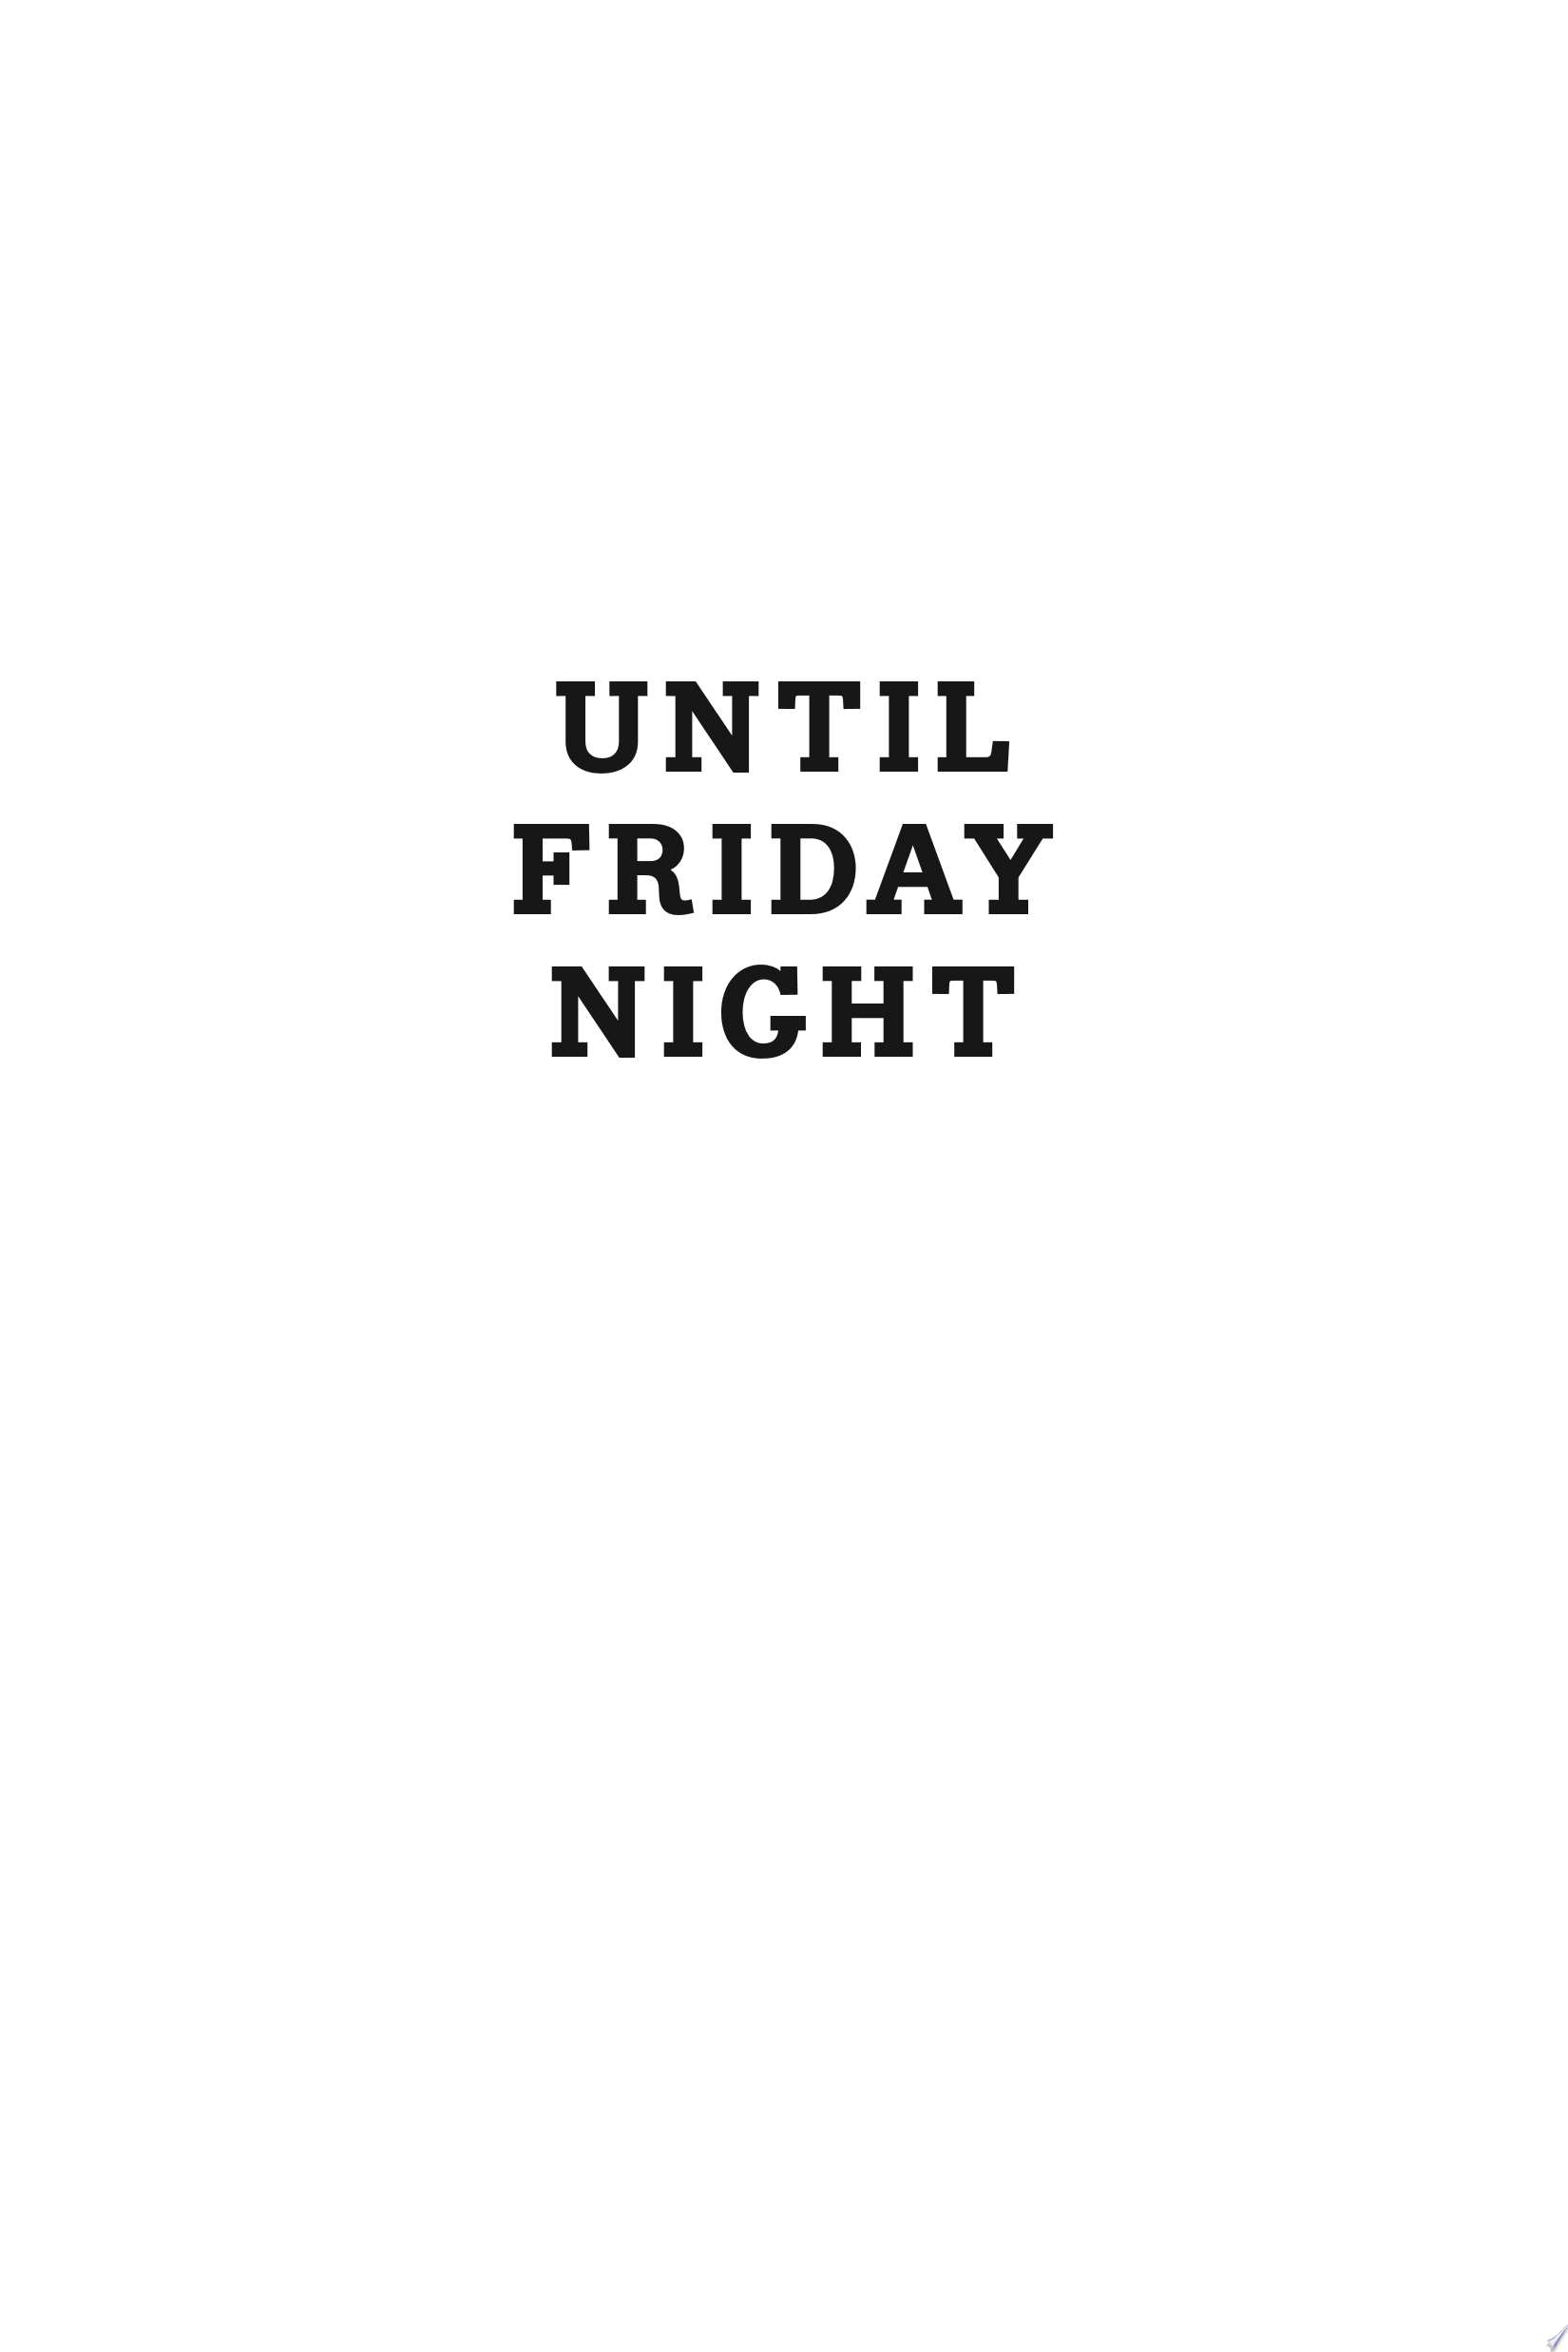 Image for "Until Friday Night"